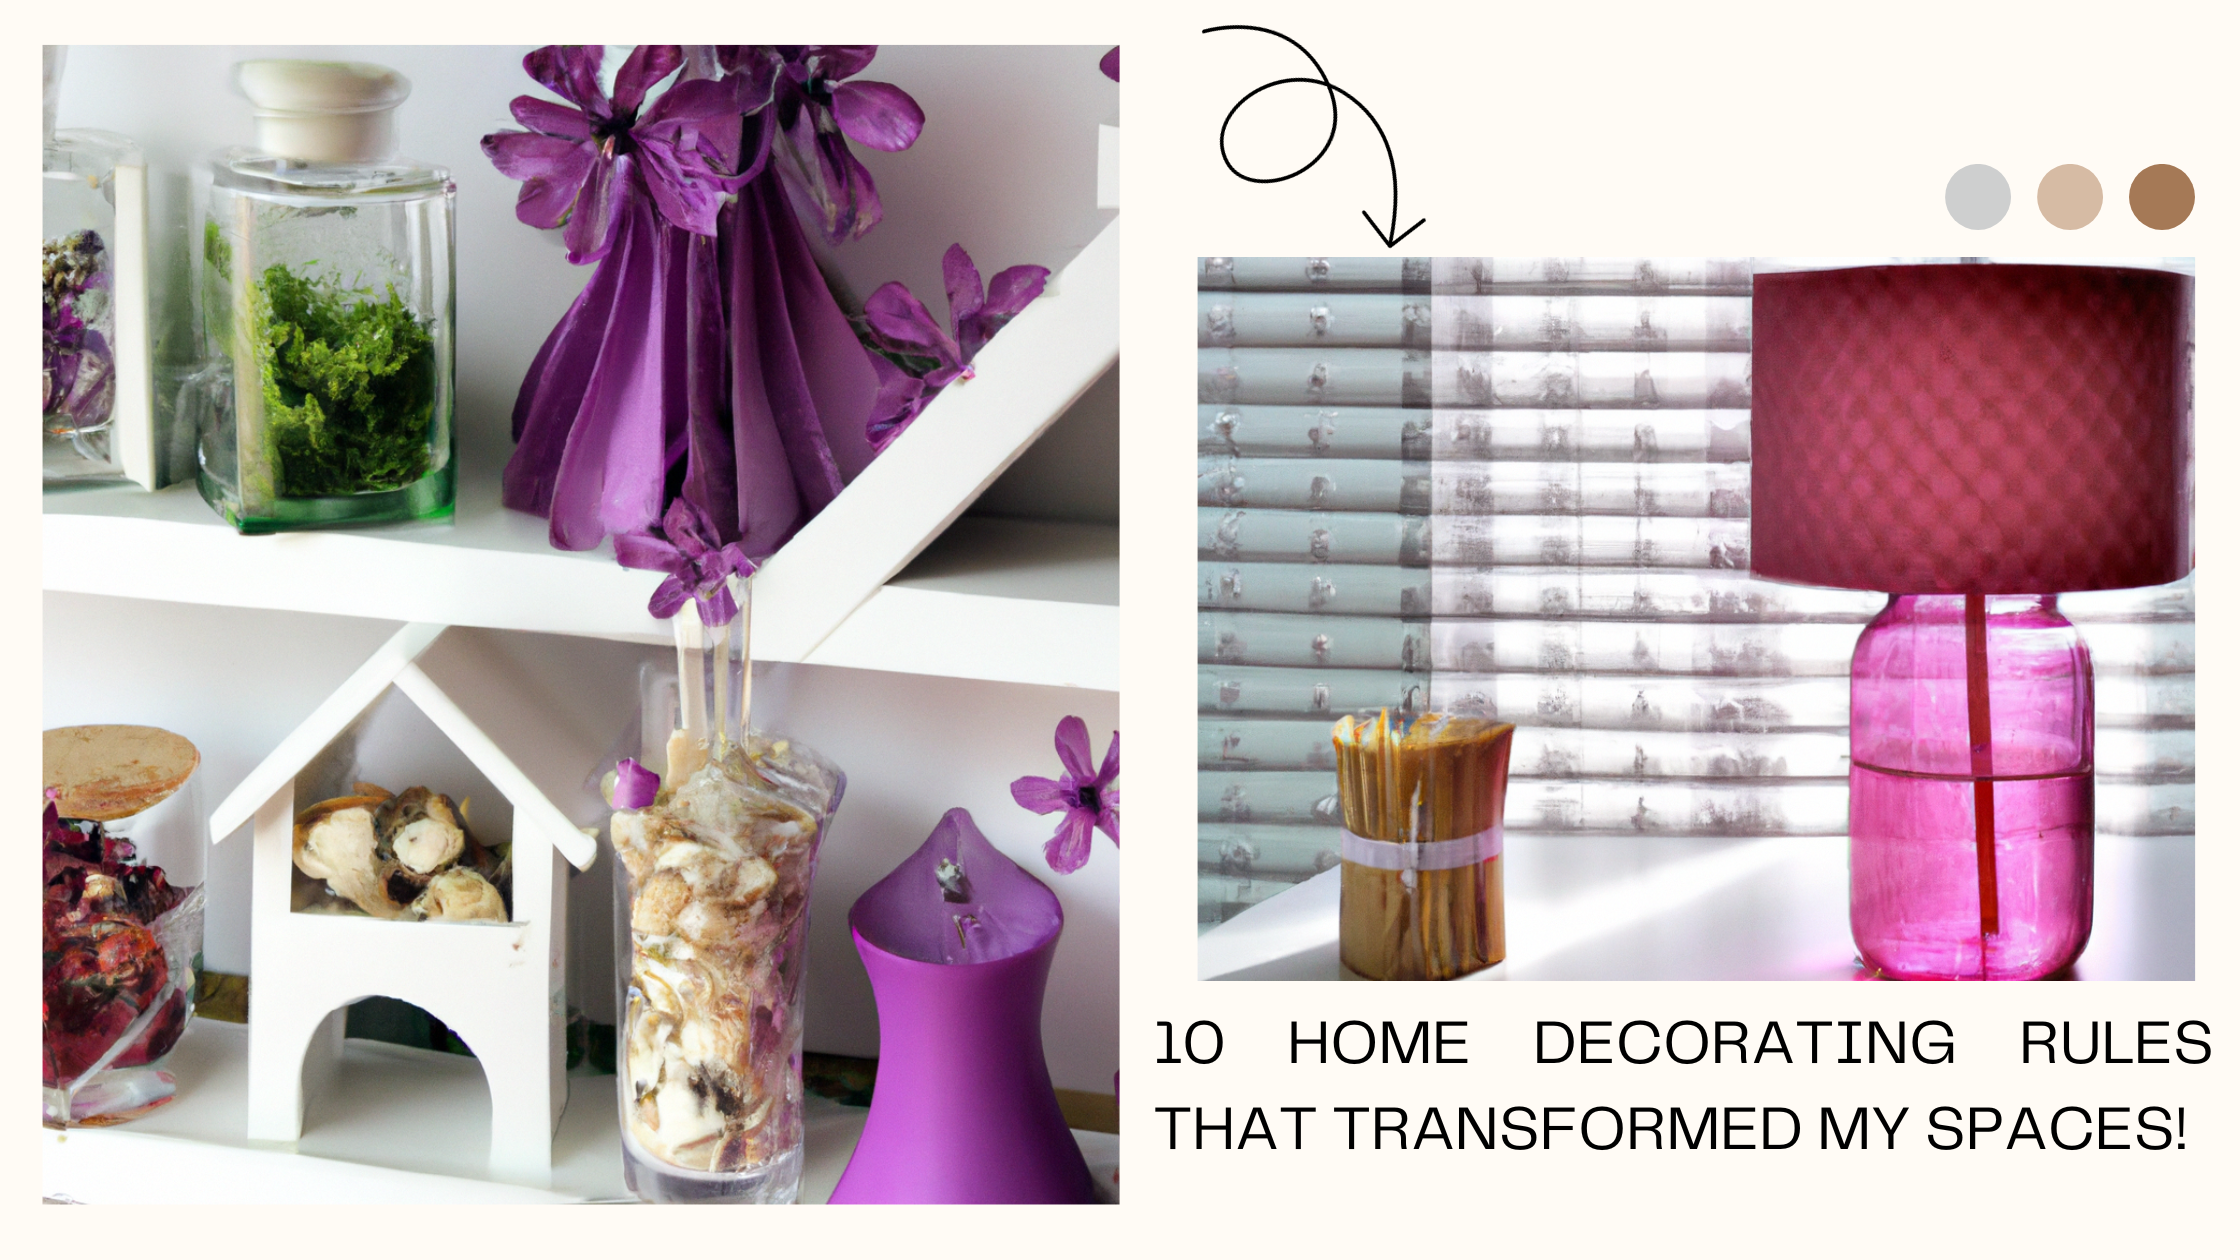 Home Decorating Rules That Transformed My Spaces!